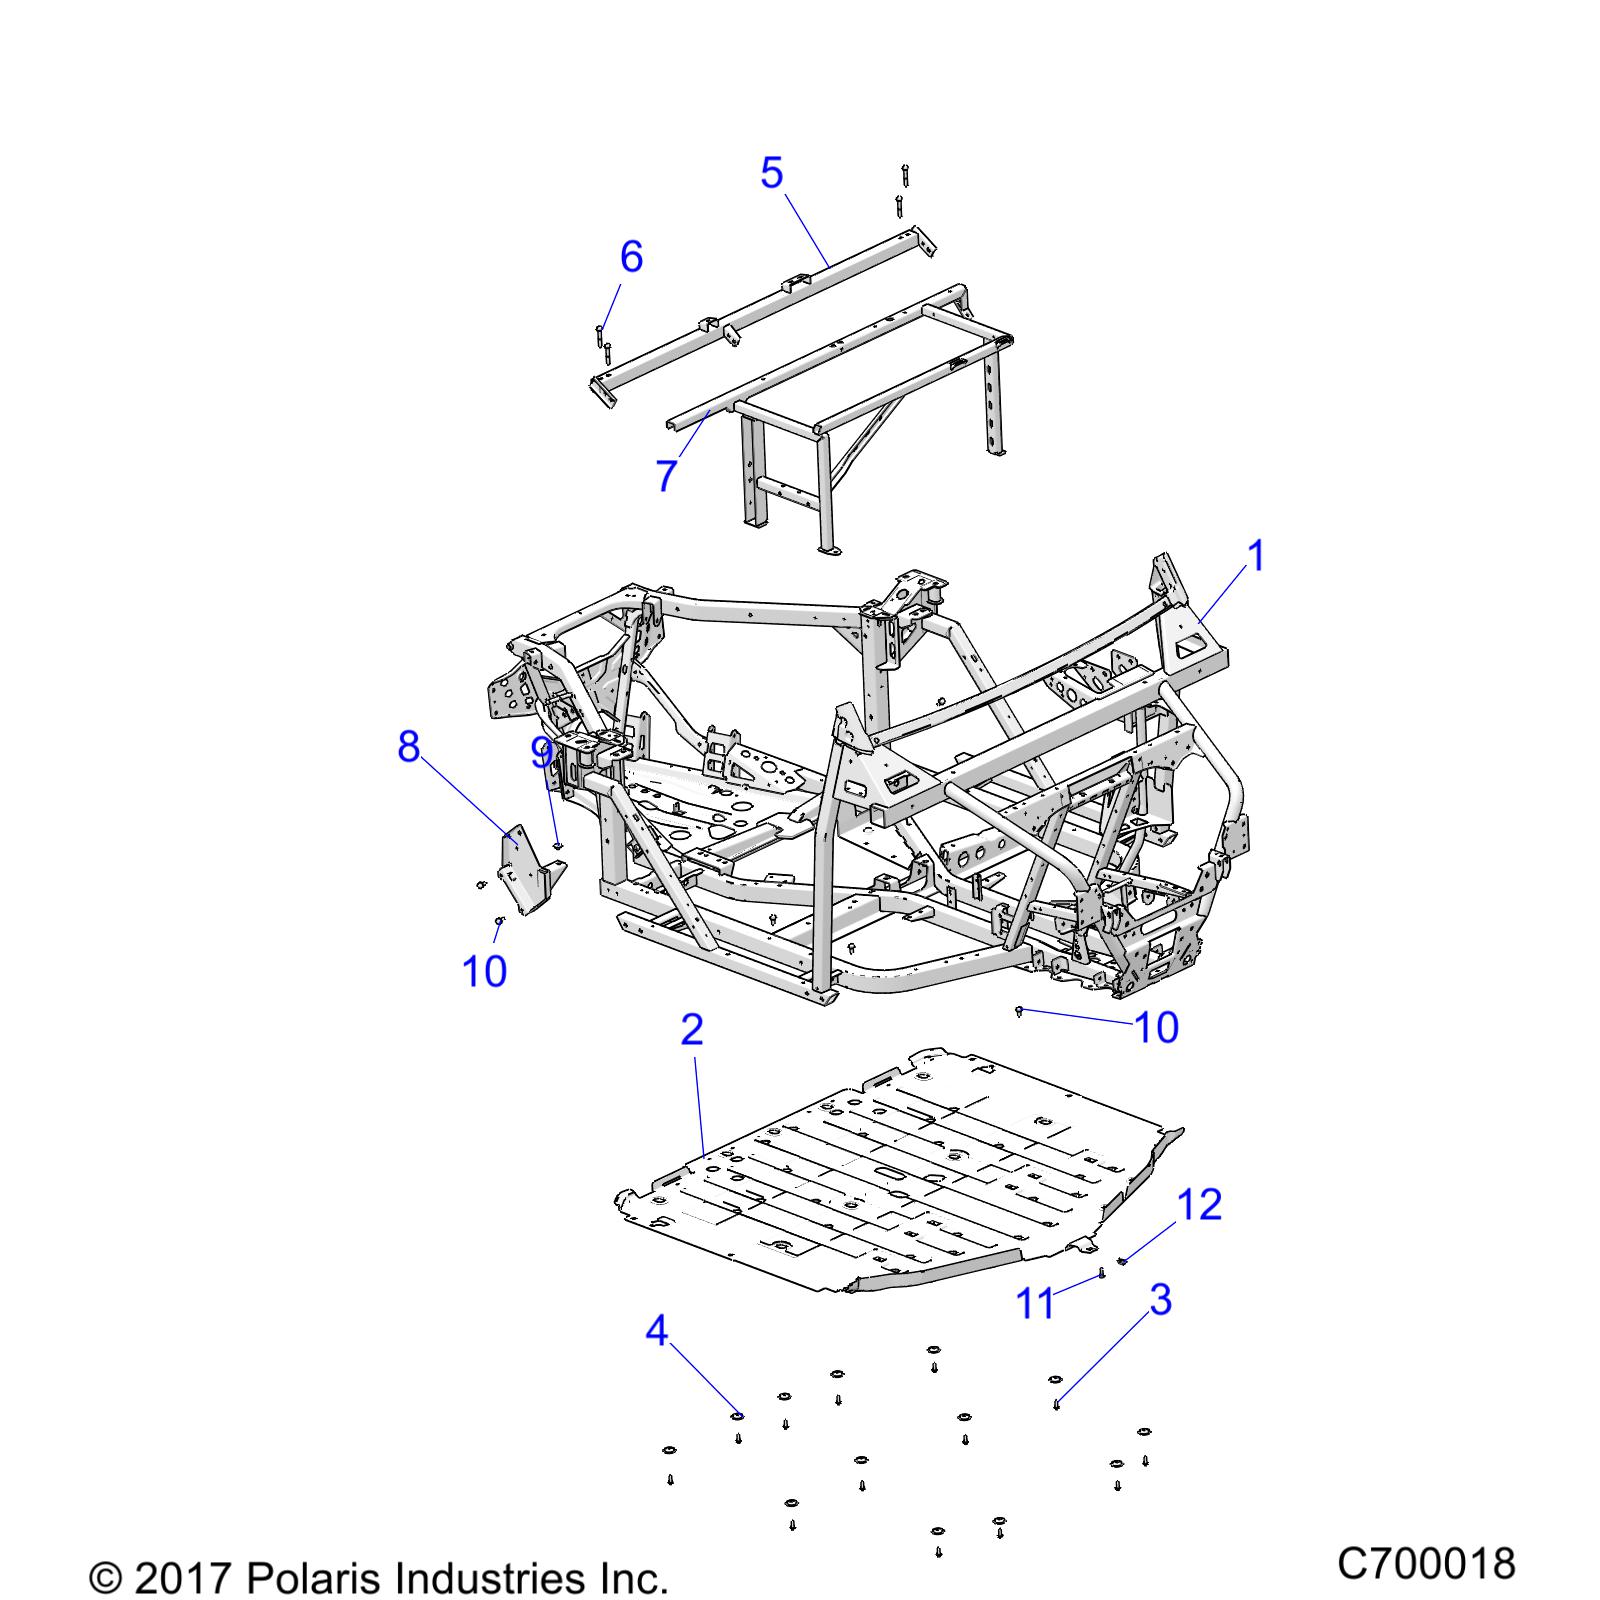 CHASSIS, MAIN FRAME AND SKID PLATES - R20RRE99J1 (C700018)